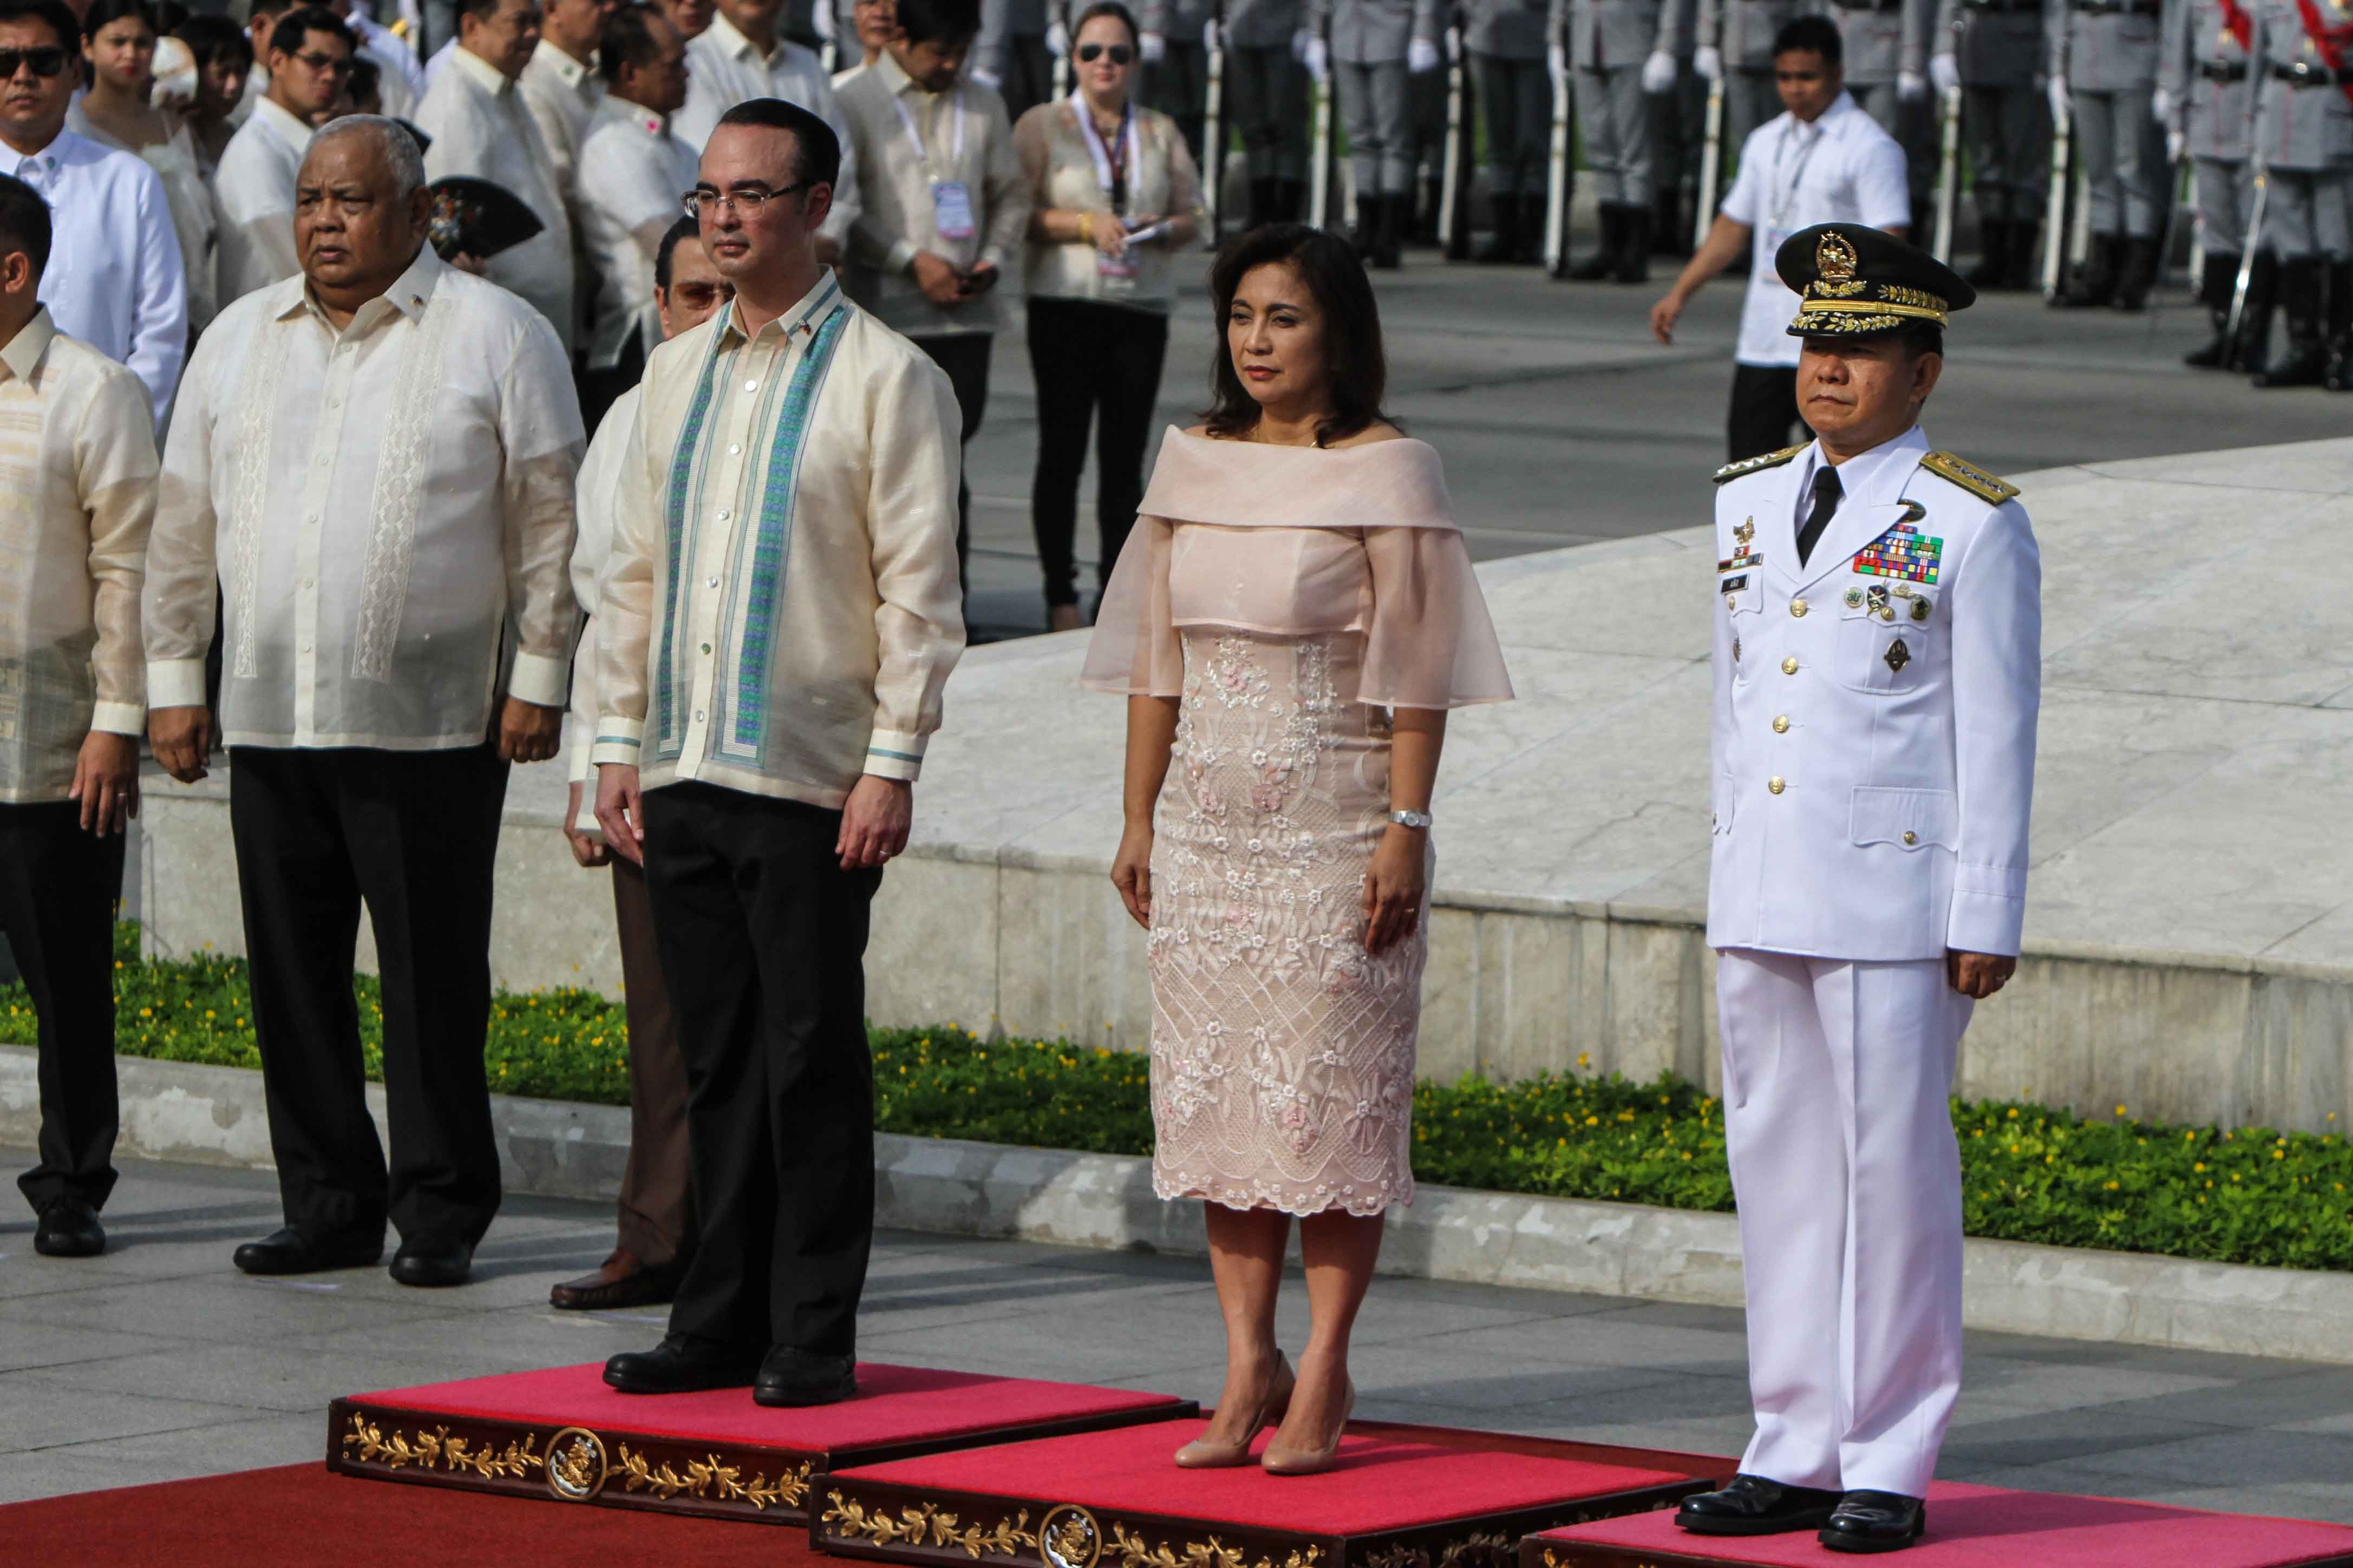 WITHOUT THE PRESIDENT. Vice President Leni Robredo (center) with Foreign Secretary Alan Peter Cayetano (left) and Armed Forces of the Philippines chief General Eduardo Año (right) at the Rizal Monument after the flag-raising ceremony. Photo by Lito Boras/Rappler 